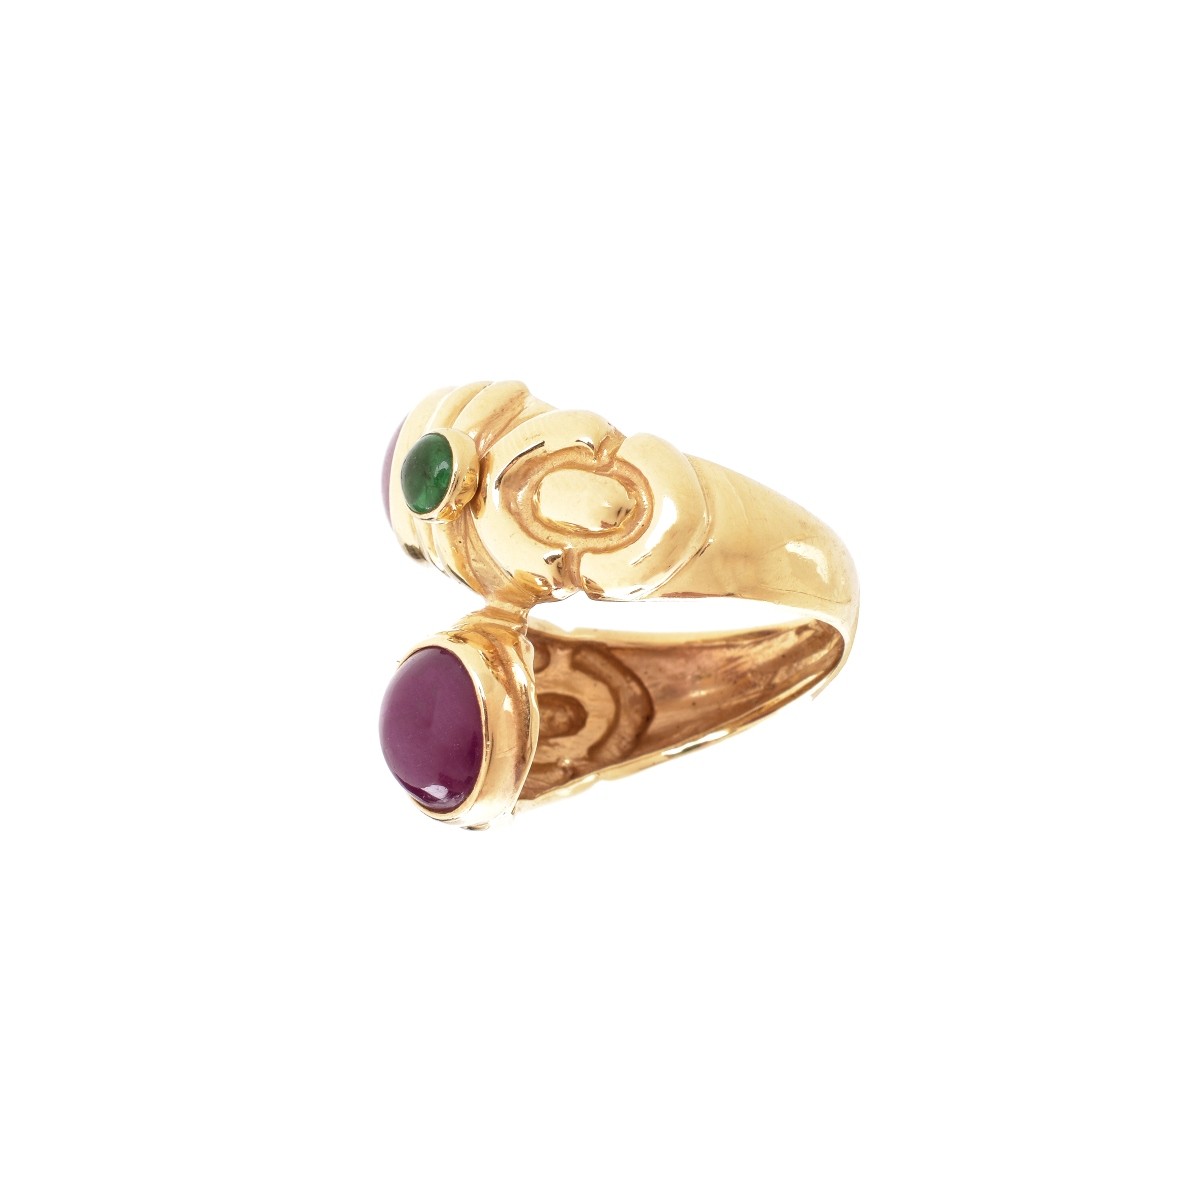 Vintage Ruby, Emerald and 14K Ring